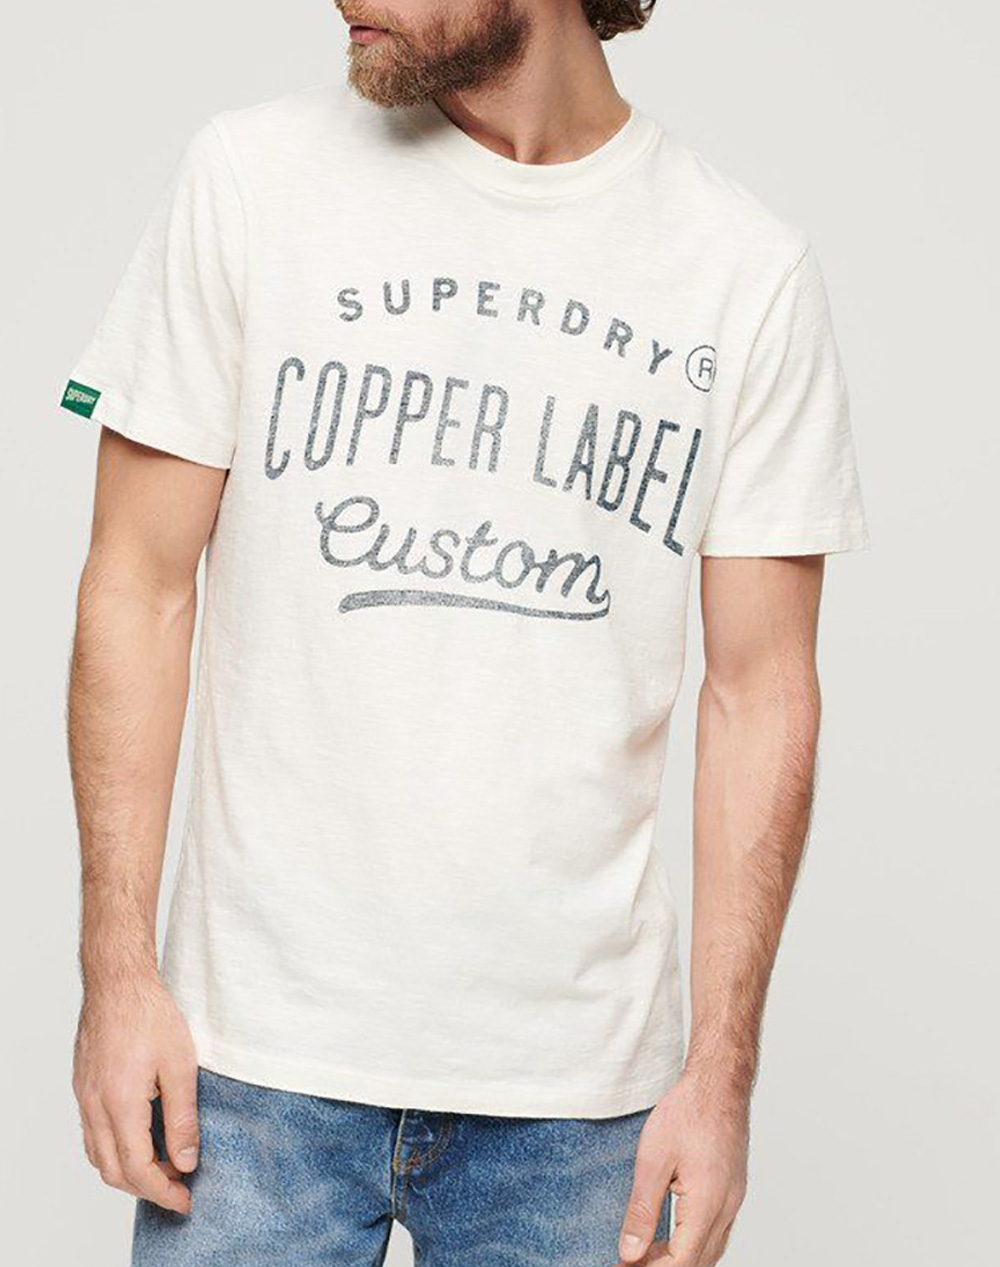 SUPERDRY D2 OVIN COPPER LABEL WORKWEAR TEE ΜΠΛΟΥΖΑ ΑΝΔΡΙΚΟ M1011900A-2BC OffWhite 3820ASUPE3400315_XR28300